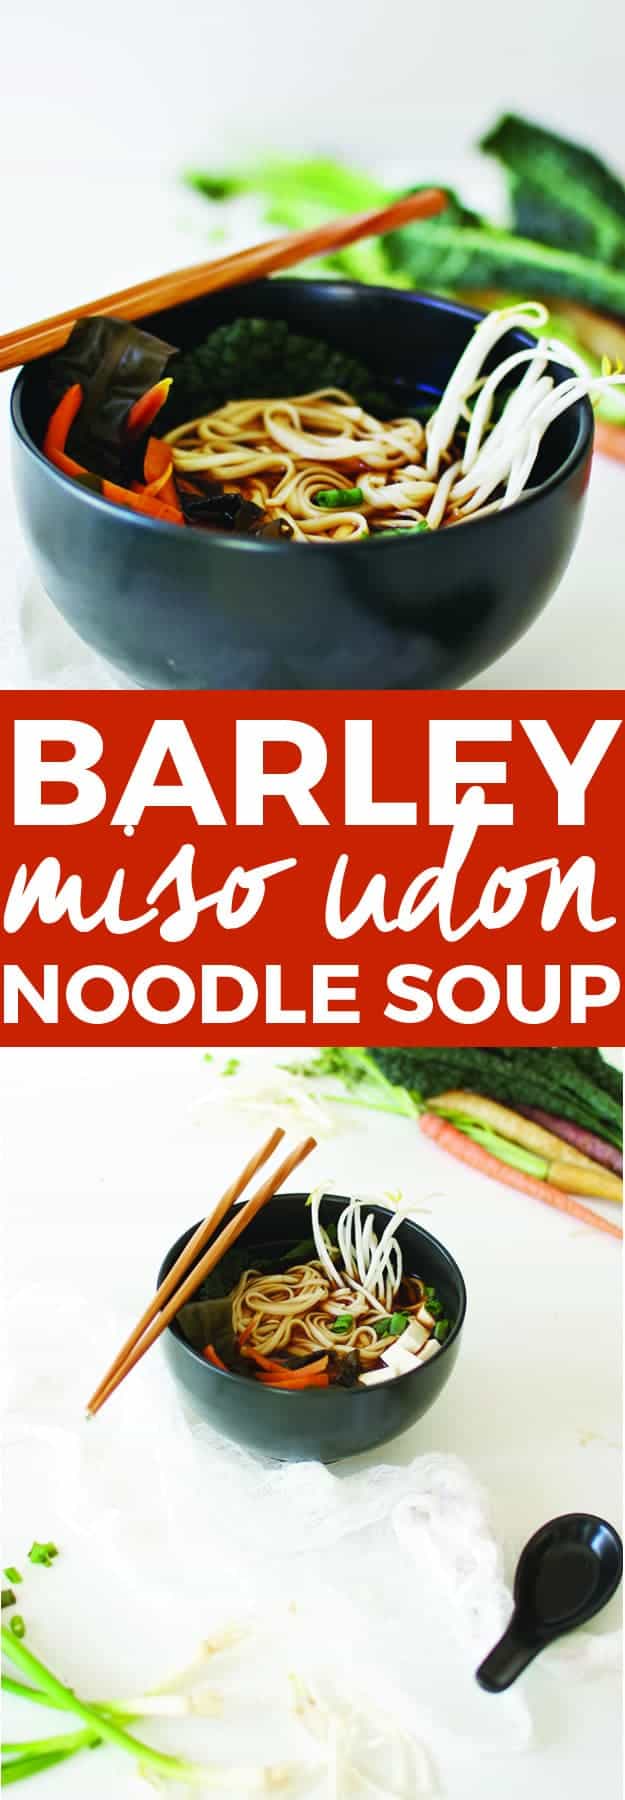 Barley Miso Udon Noodle Soup Recipe | The Butter Half